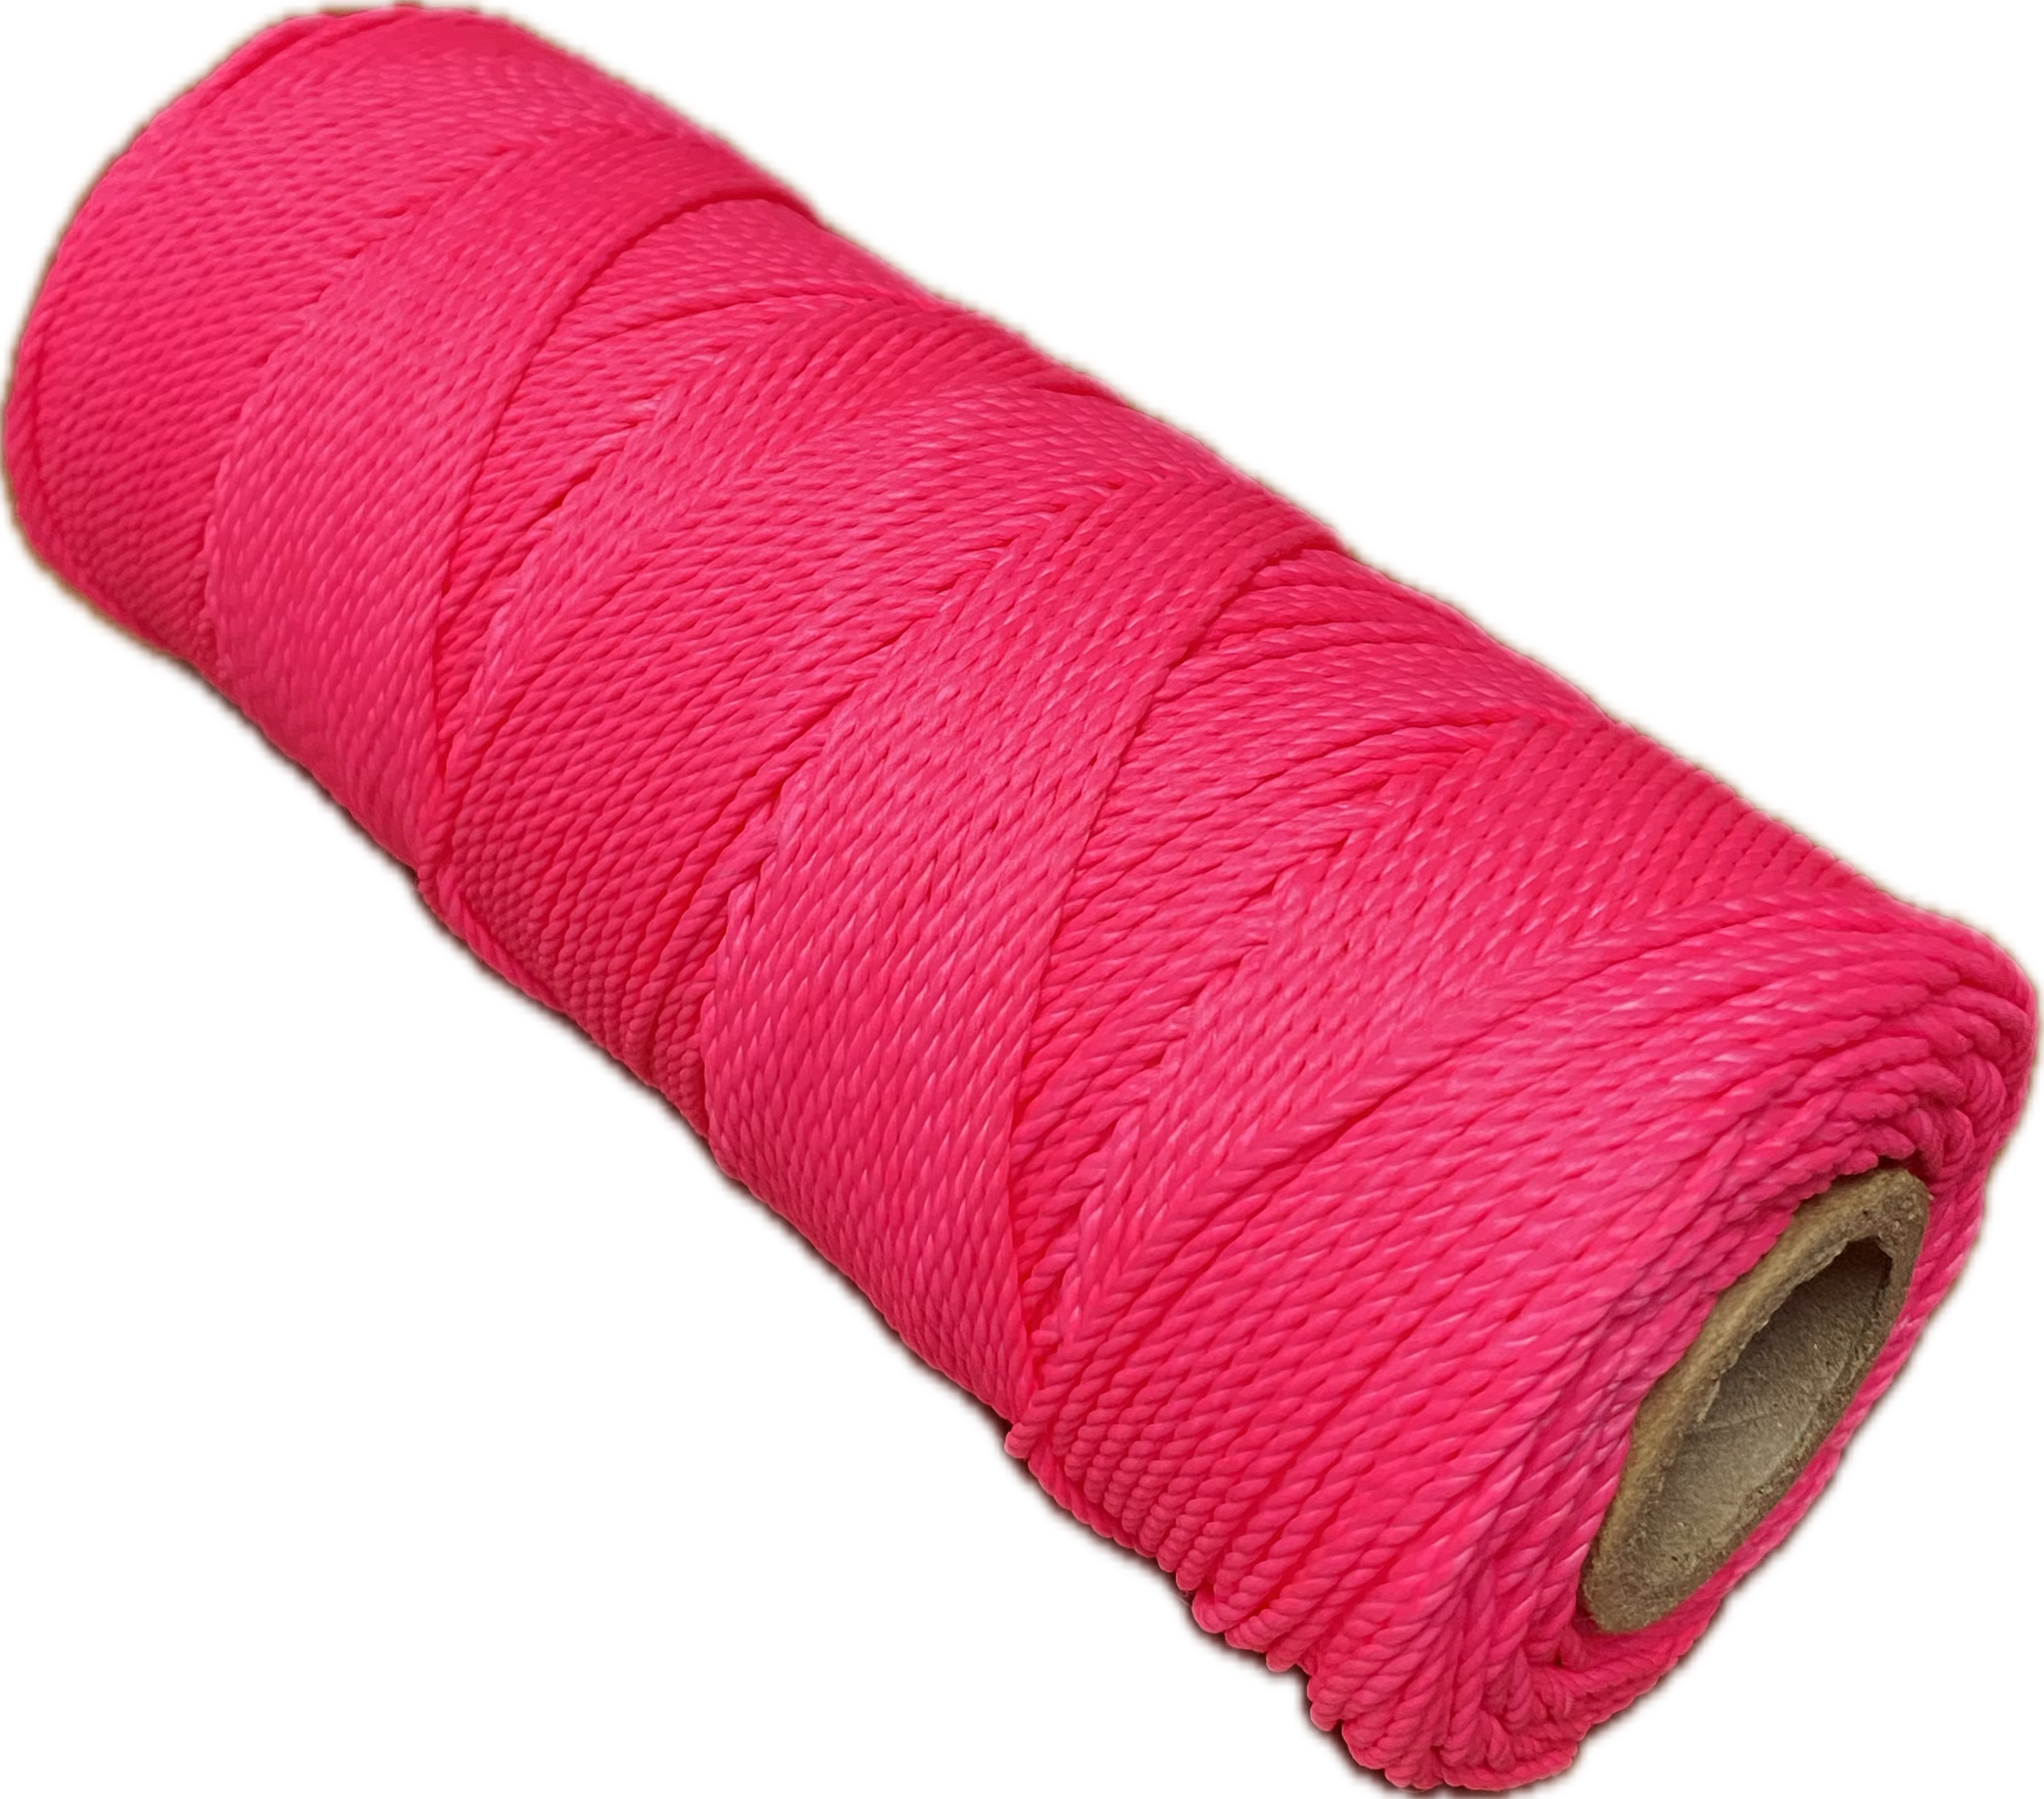 #18 x 550ft Glo-Pink Twisted String Line